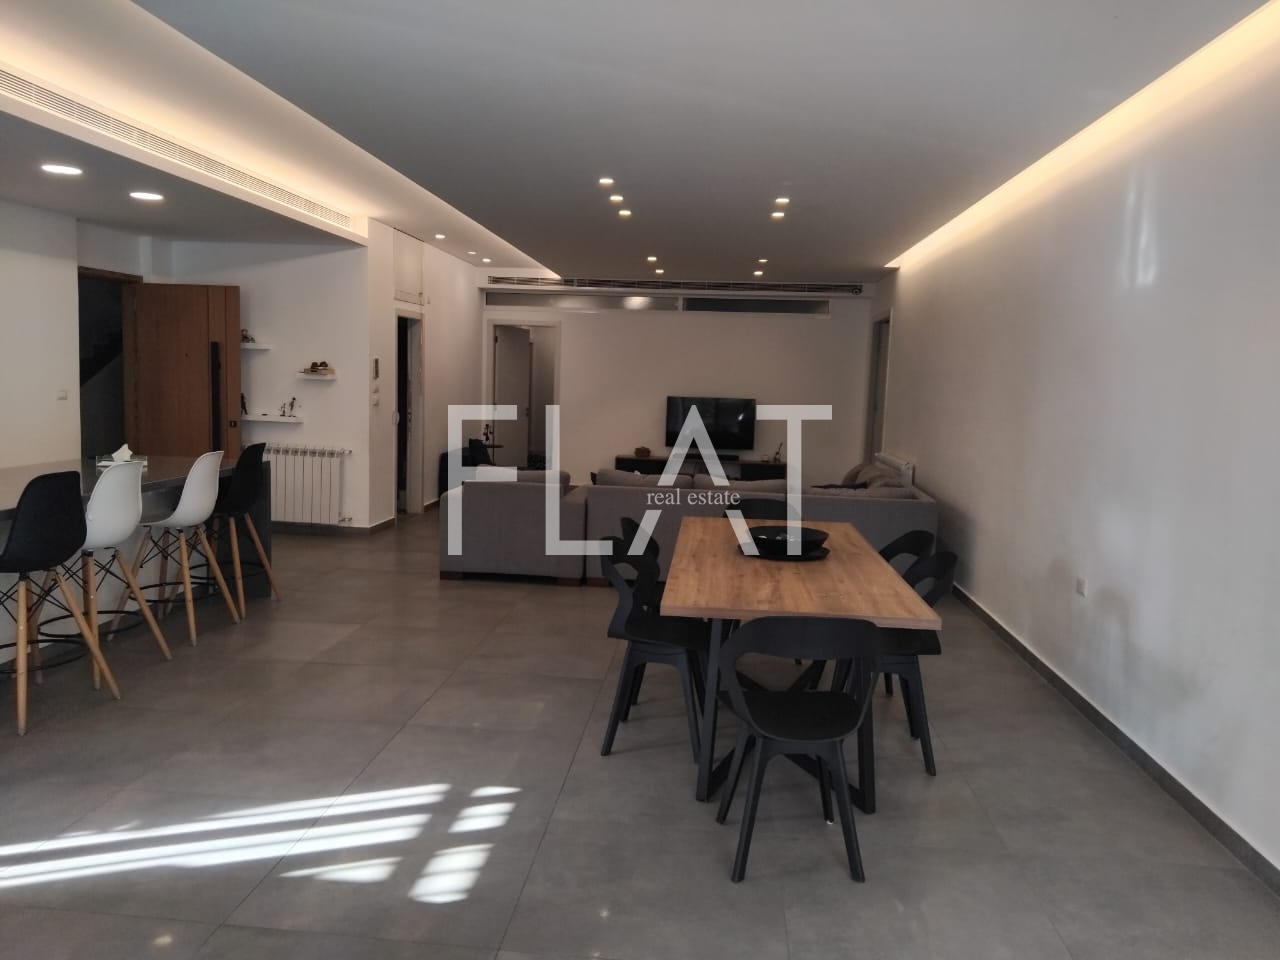 Furnished Apartment for Rent in Daychounieh, Mansourieh | 1300$